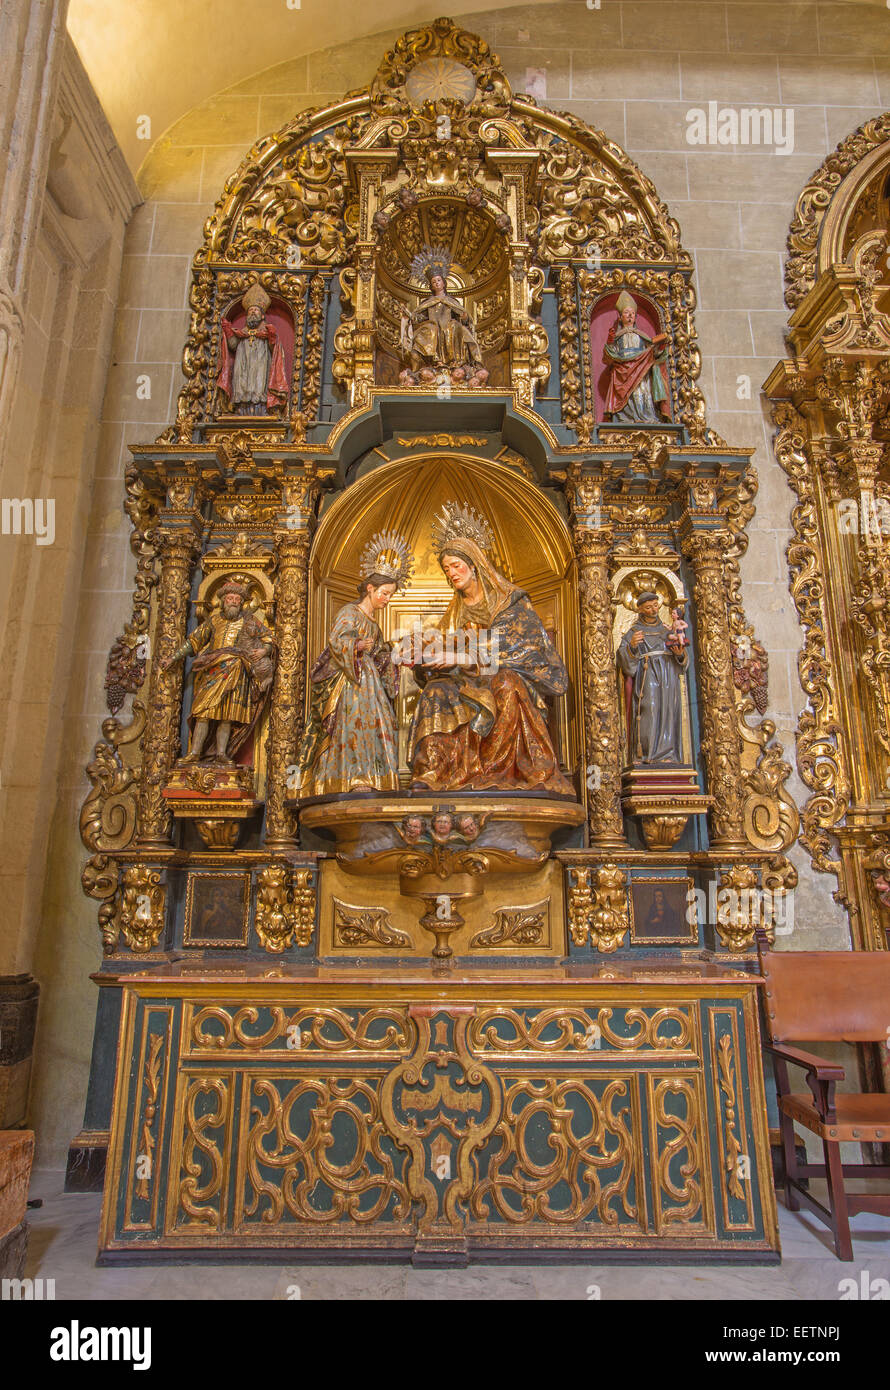 SEVILLE, SPAIN - OCTOBER 28, 2014: The side altar withe the st. Ann child Mary Stock Photo